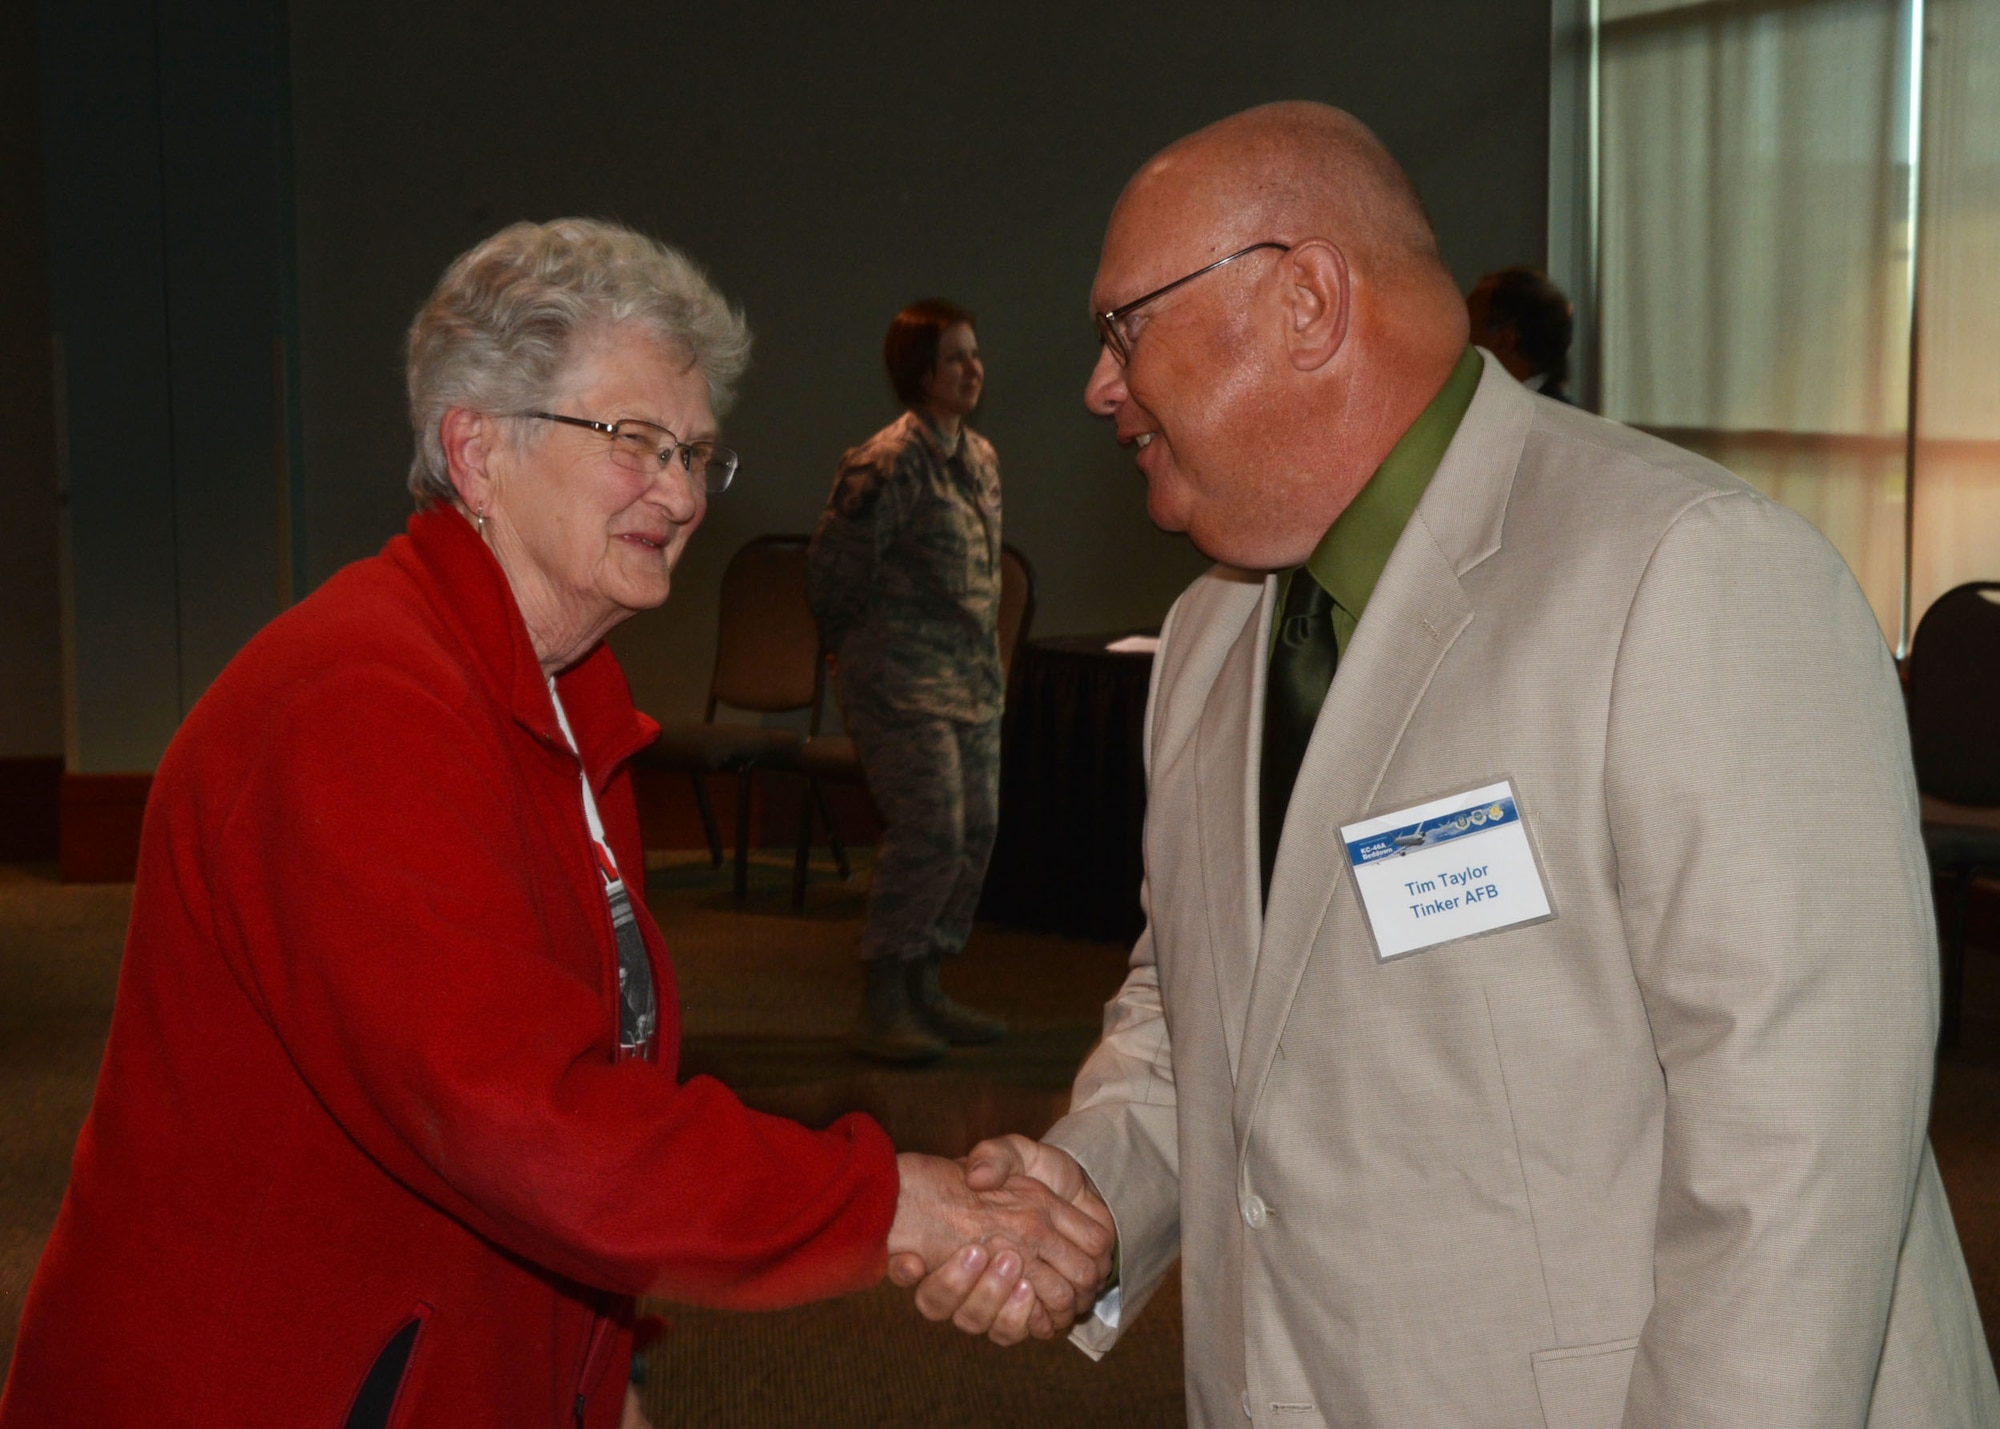 Local resident Phyllis Klein is greeted by Tim Taylor, an Environmental Health Specialist with the 72nd Air Base Wing Civil Engineer Environmental Compliance Office, at the KC-46A public scoping meeting April 21, 2016, at the Sheraton Reed Conference Center in Midwest City, Okla. (U.S. Air Force photo/Tech. Sgt. Lauren Gleason)